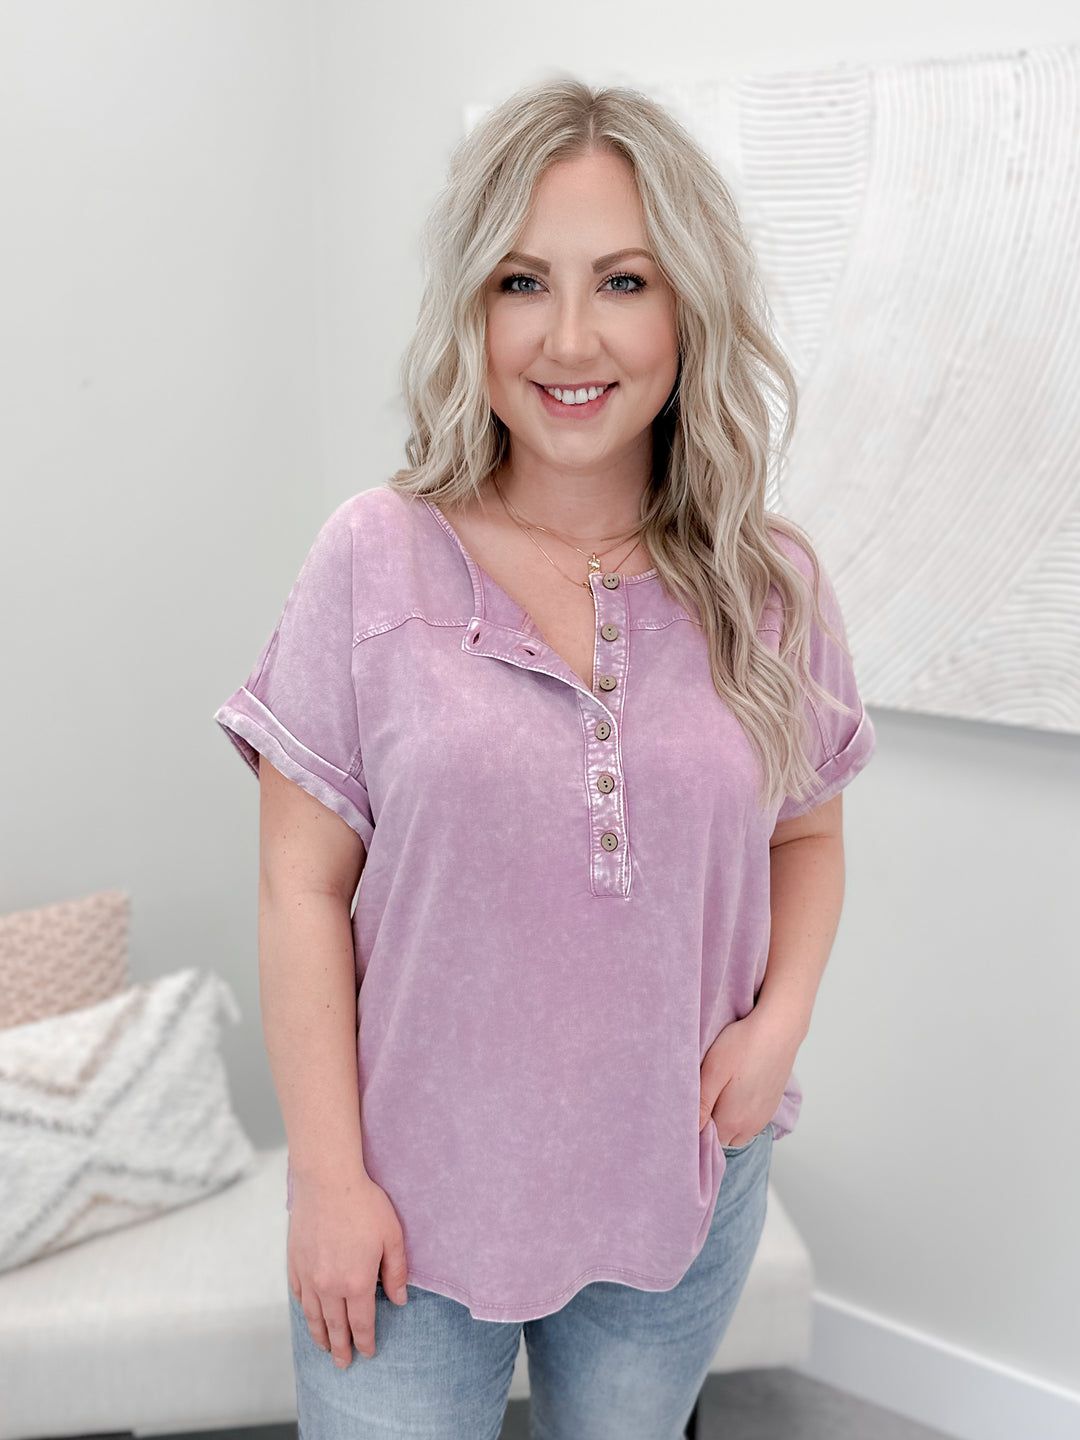 Henley Mineral Washed Tee in Washed Violet by Grace & Lace